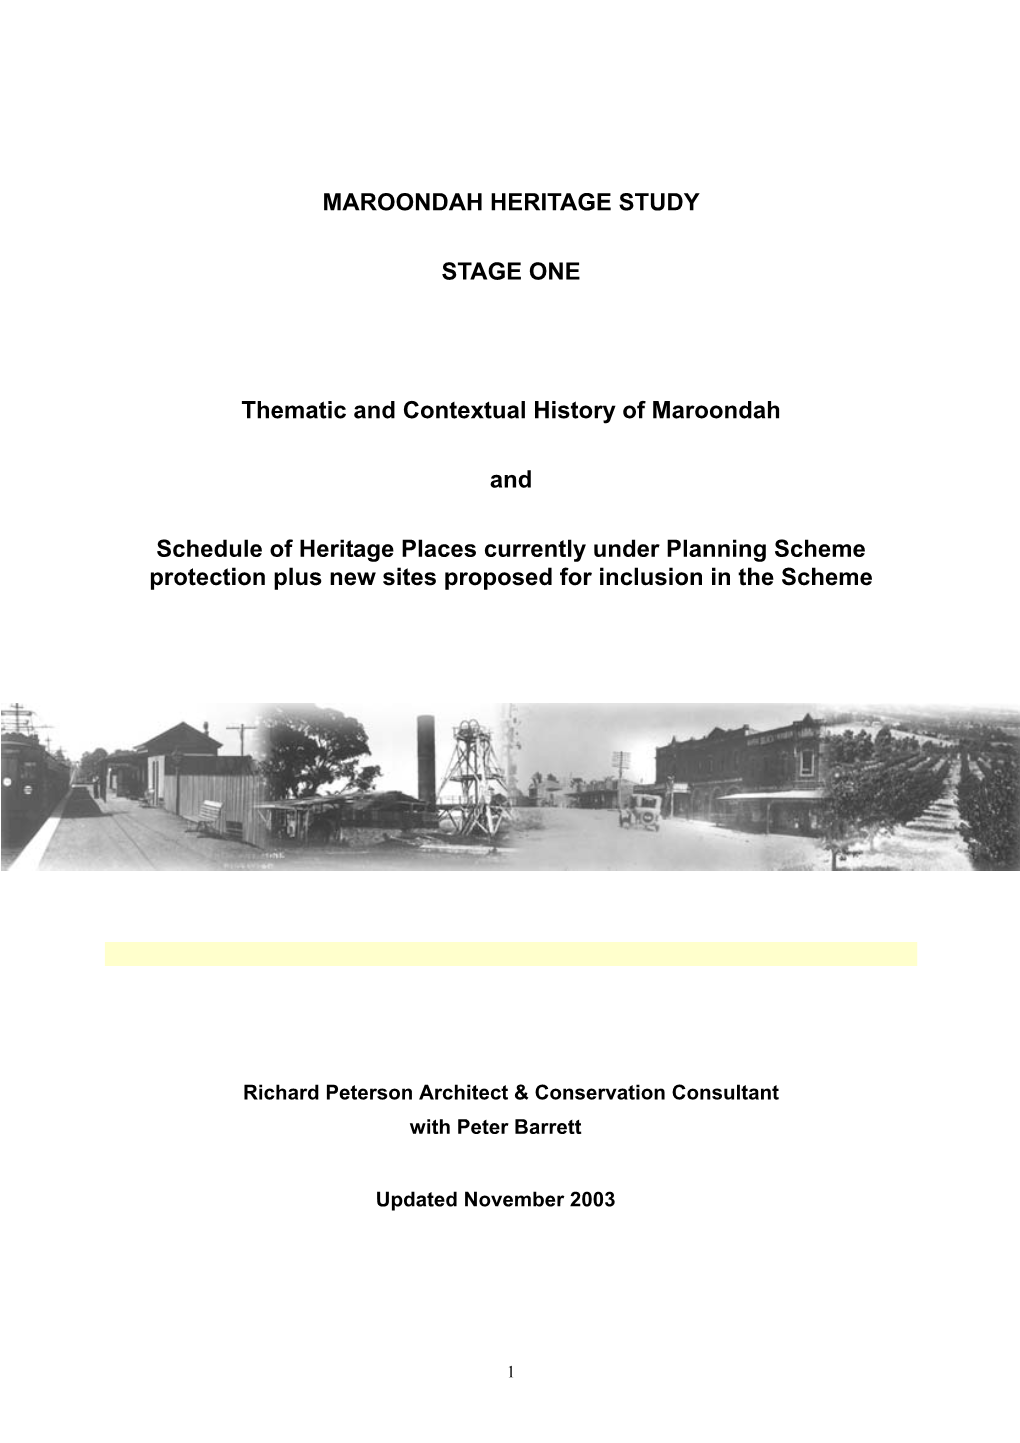 MAROONDAH HERITAGE STUDY STAGE ONE Thematic And